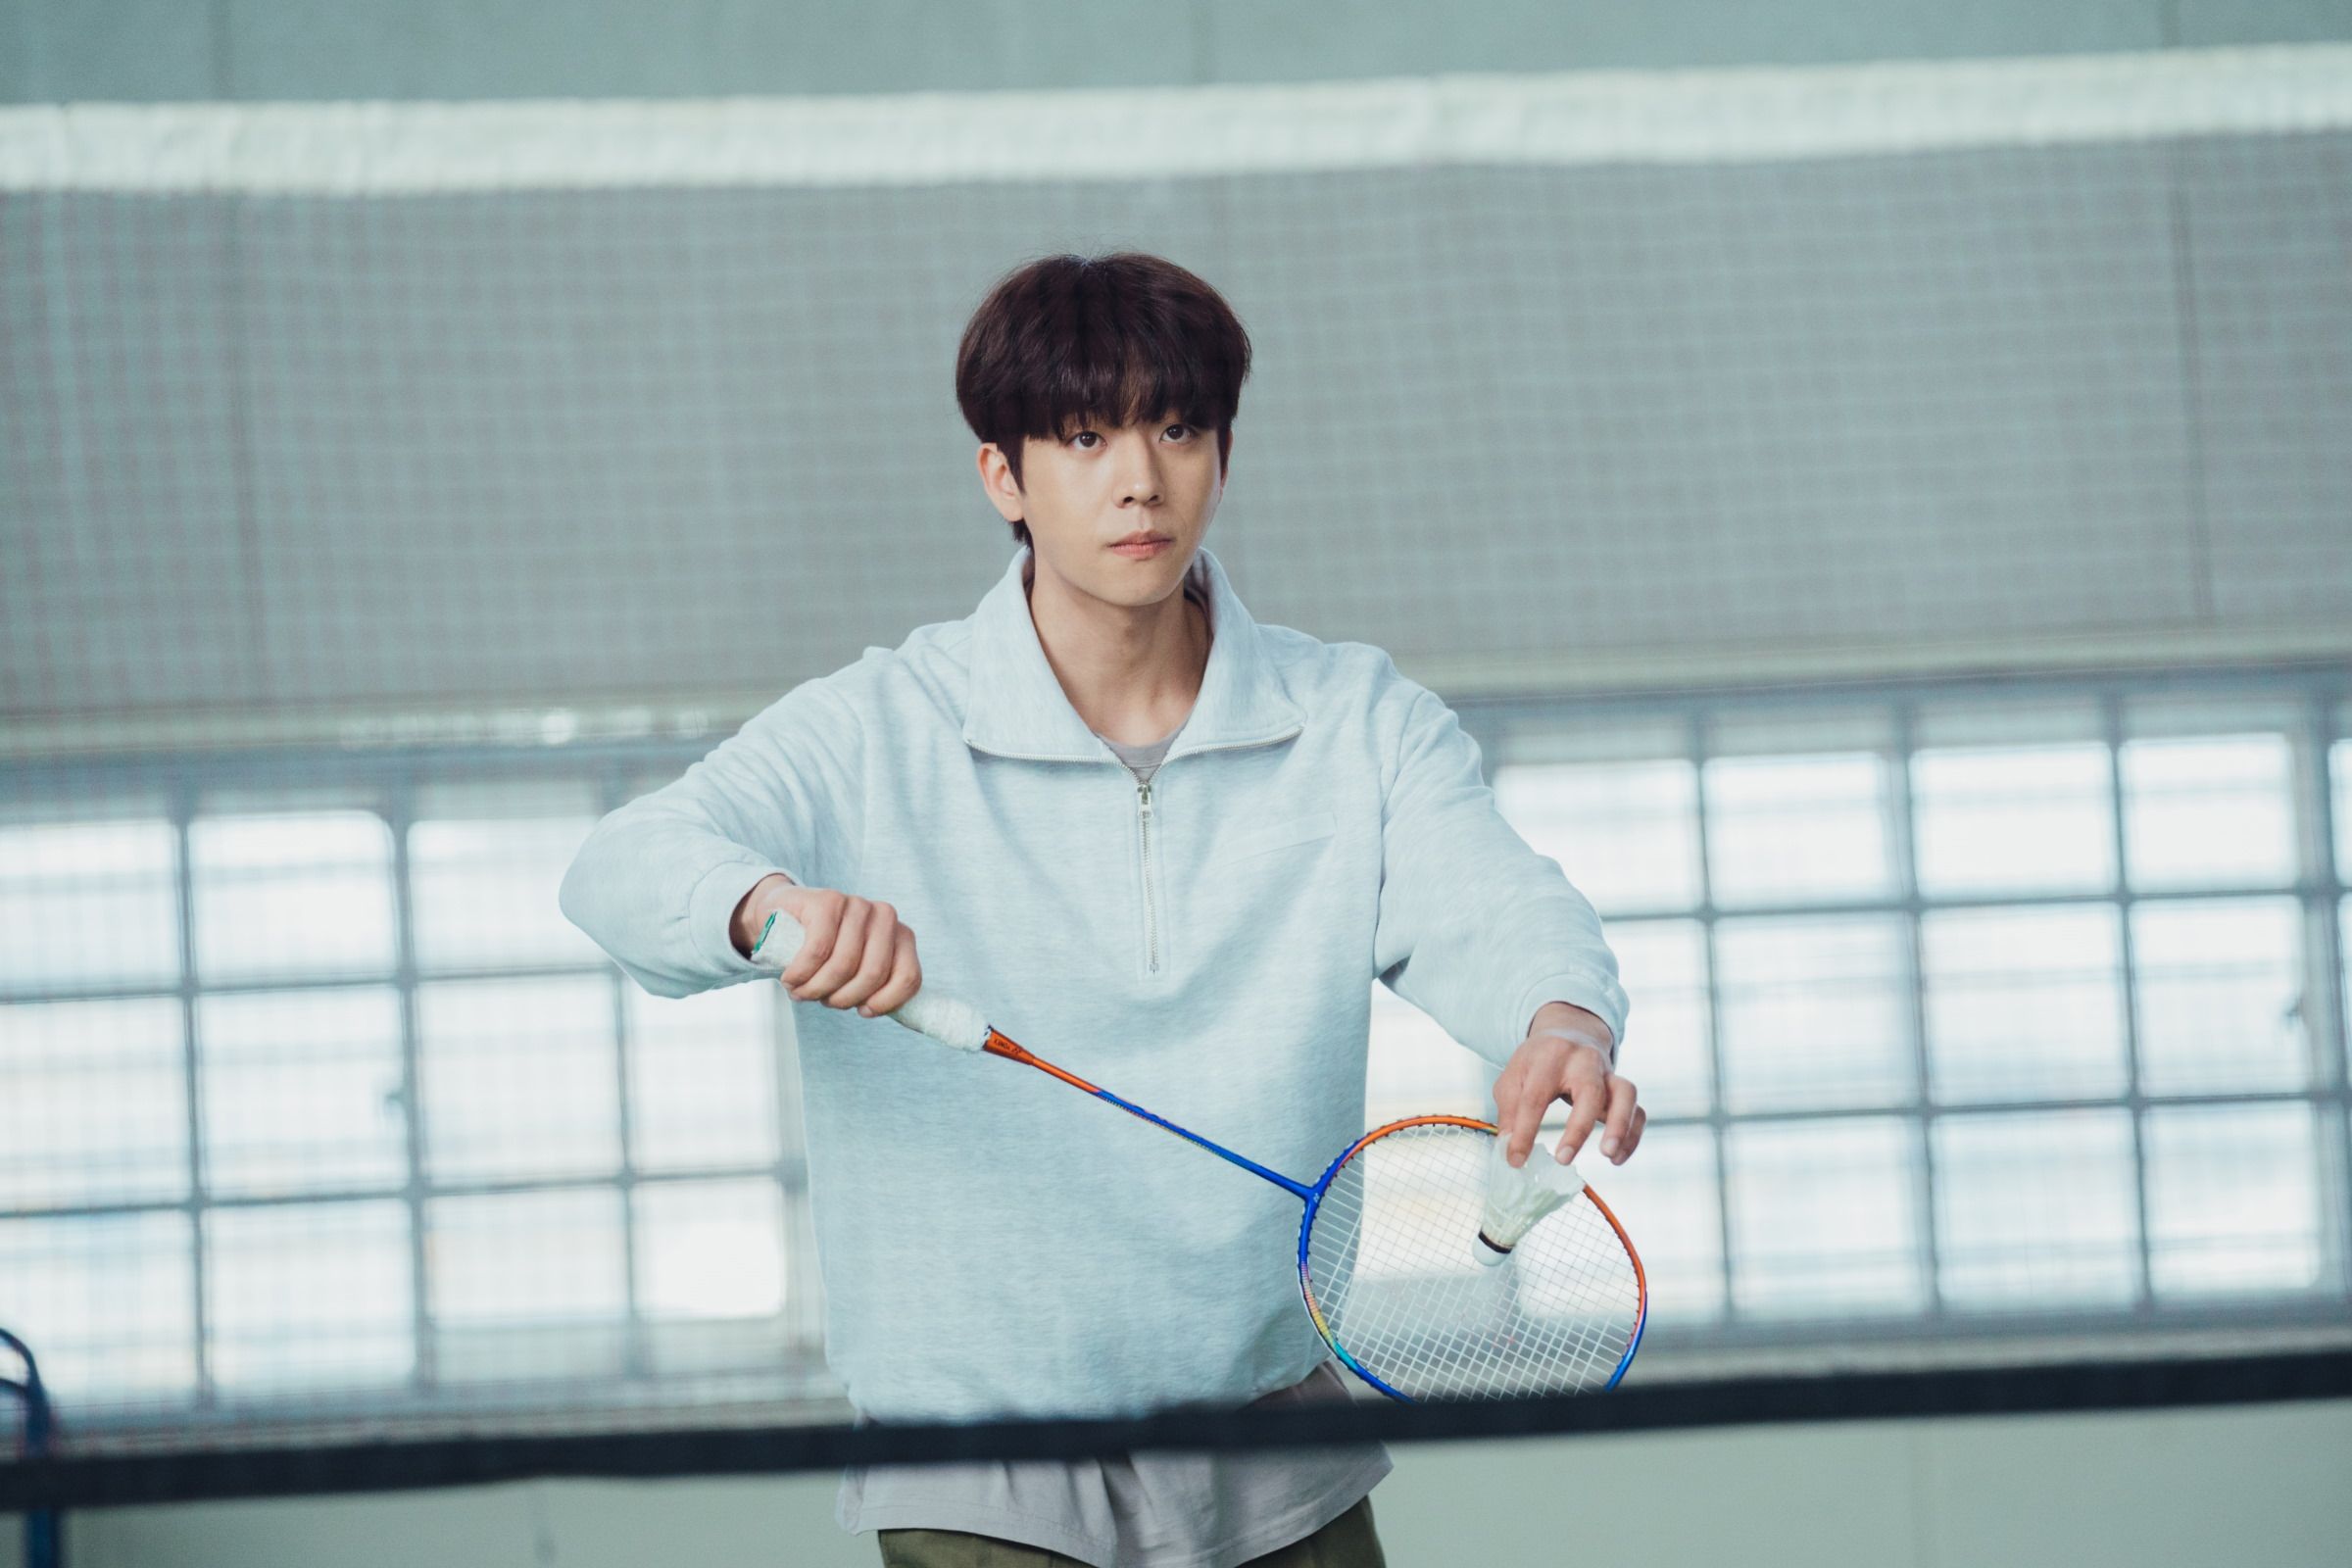 Chae Jong Hyeop And Park Ju Hyun Gear Up For A Badminton Match In